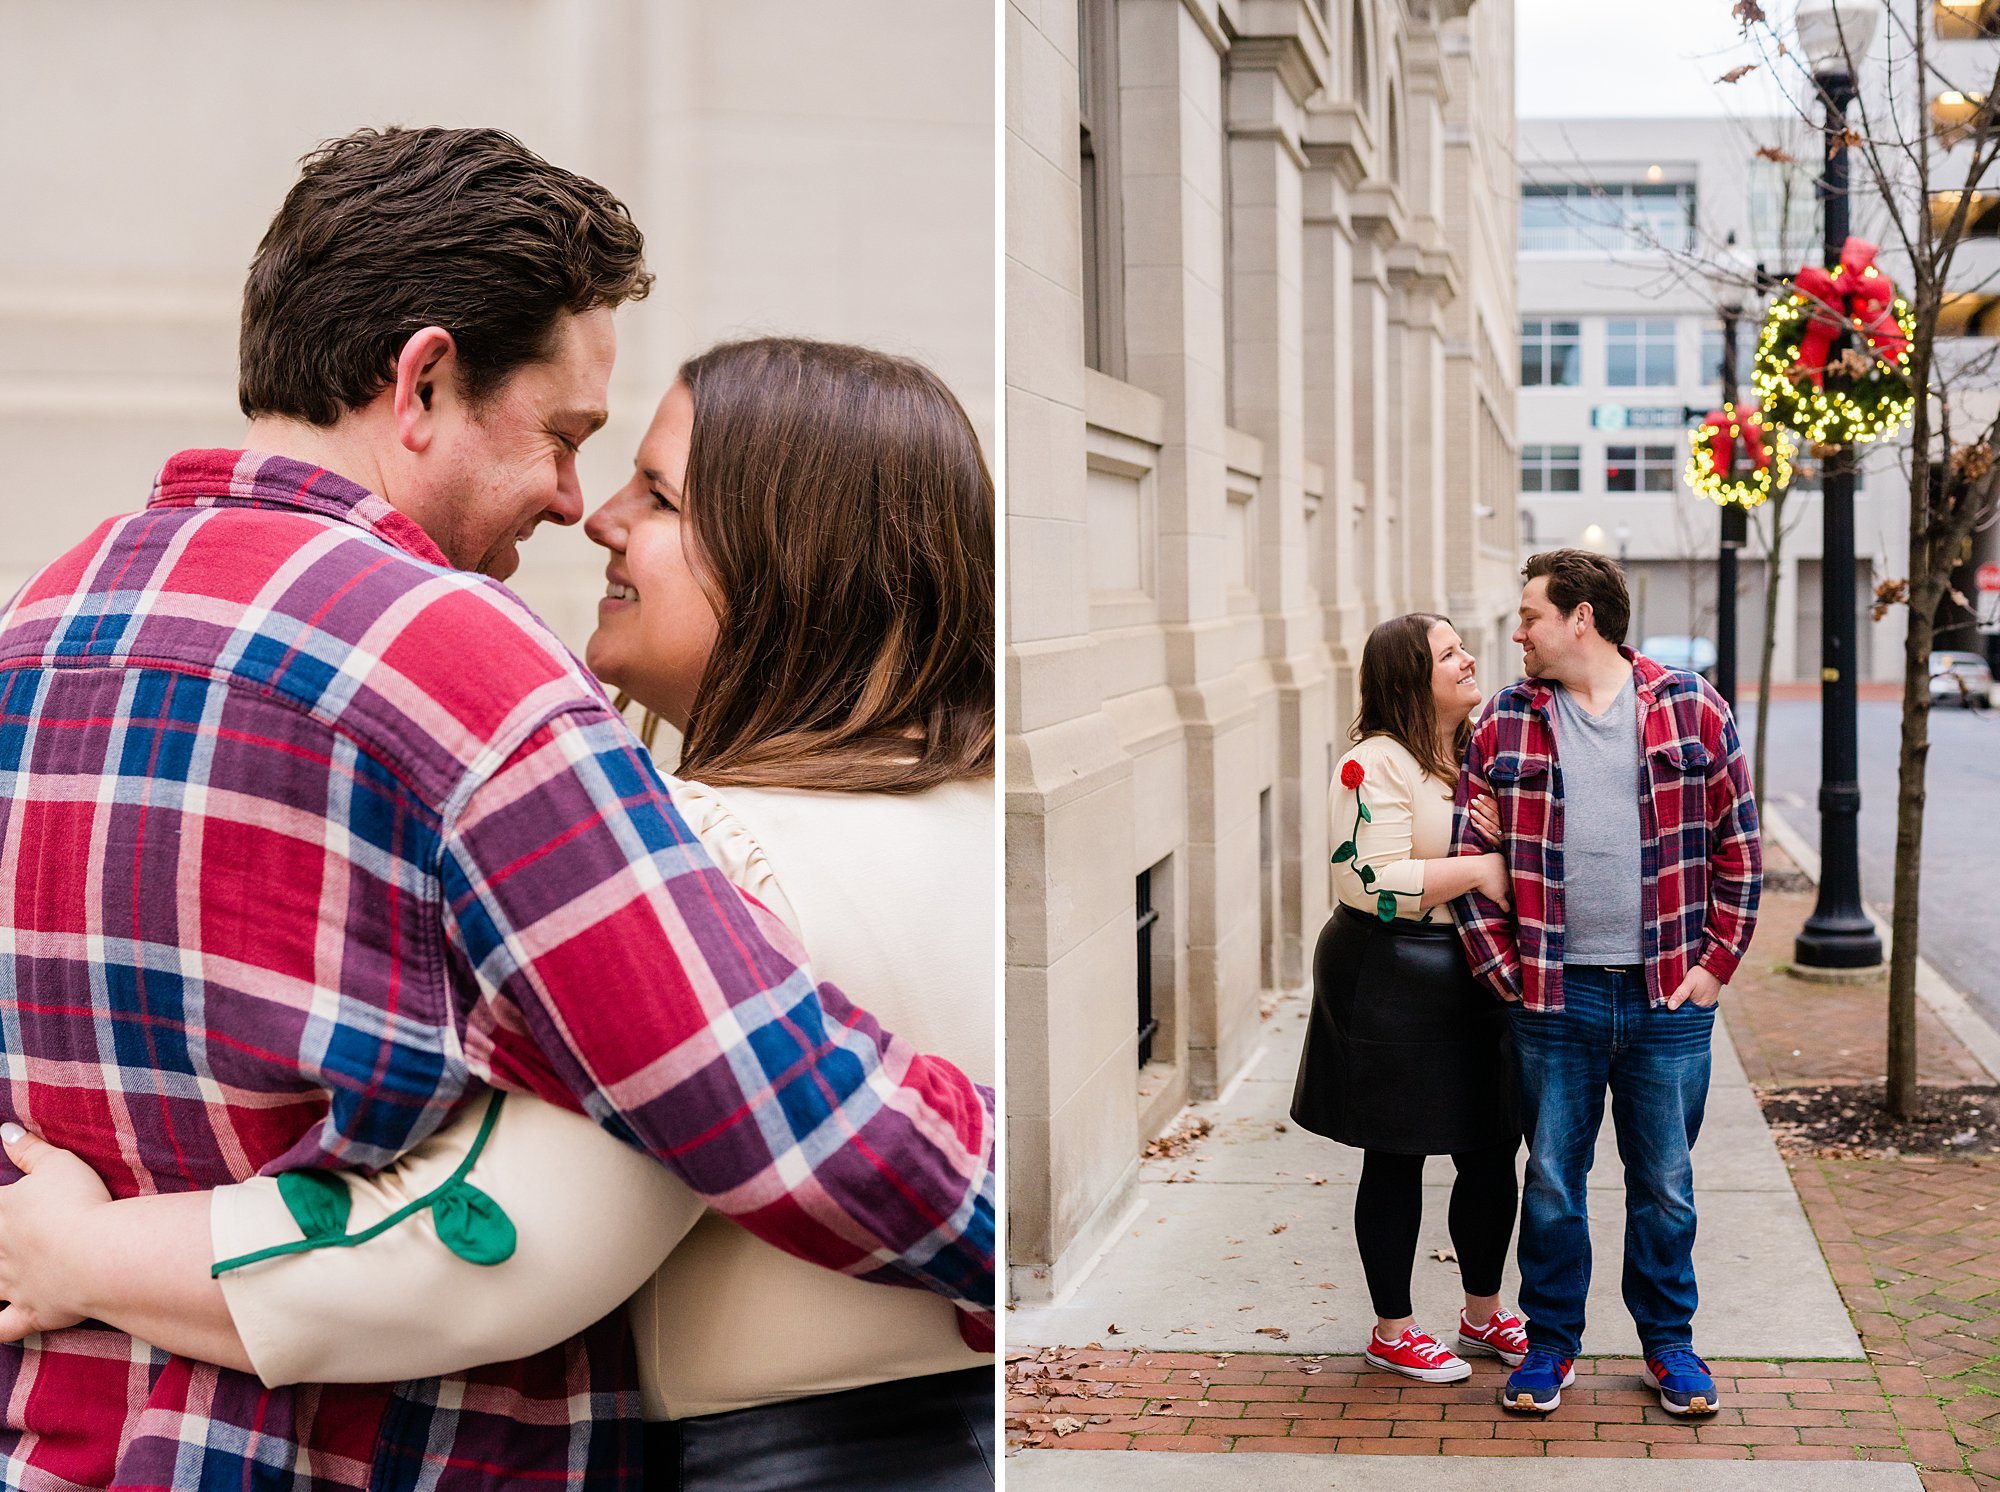 emily grace photo, a day in the life records lancaster, lancaster pa wedding photographer, downtown lancaster engagement session, lancaster pa wedding venues, wedding venues lancaster pa